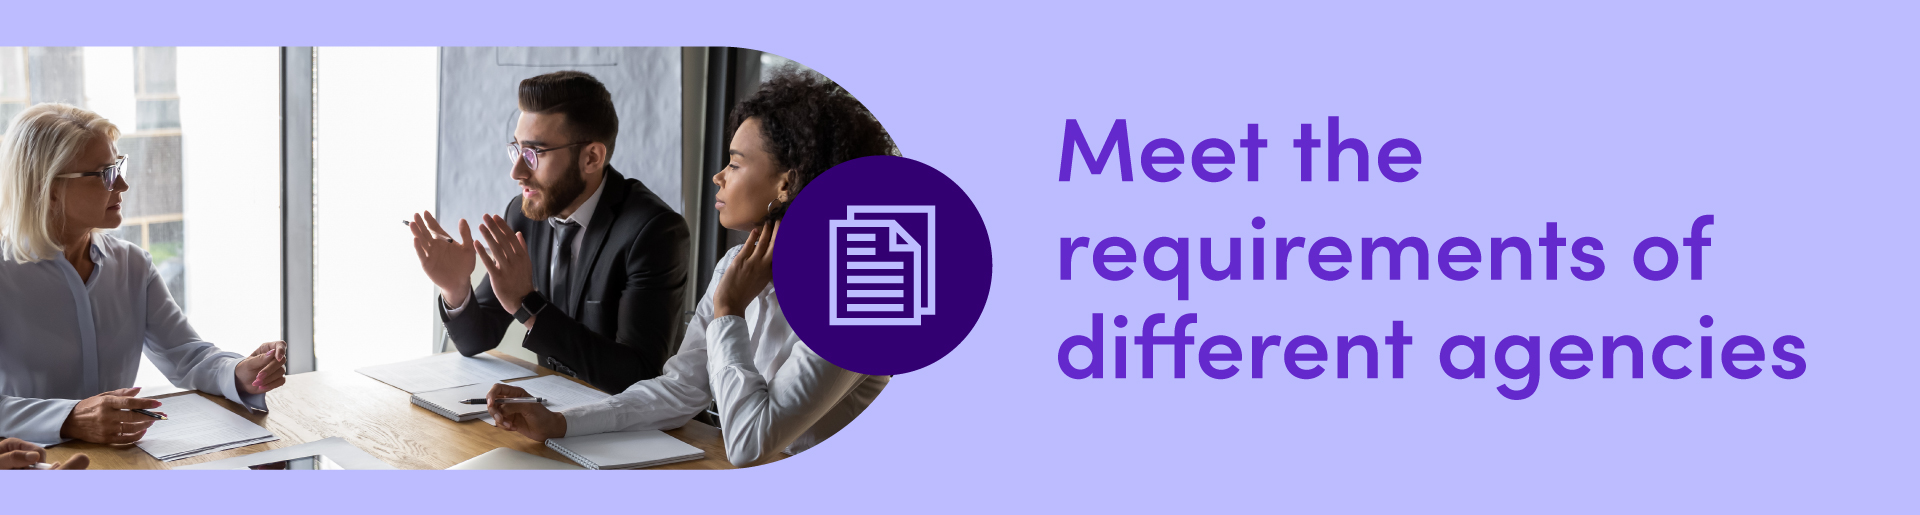 Meet-the-requirements-of-different-agencies